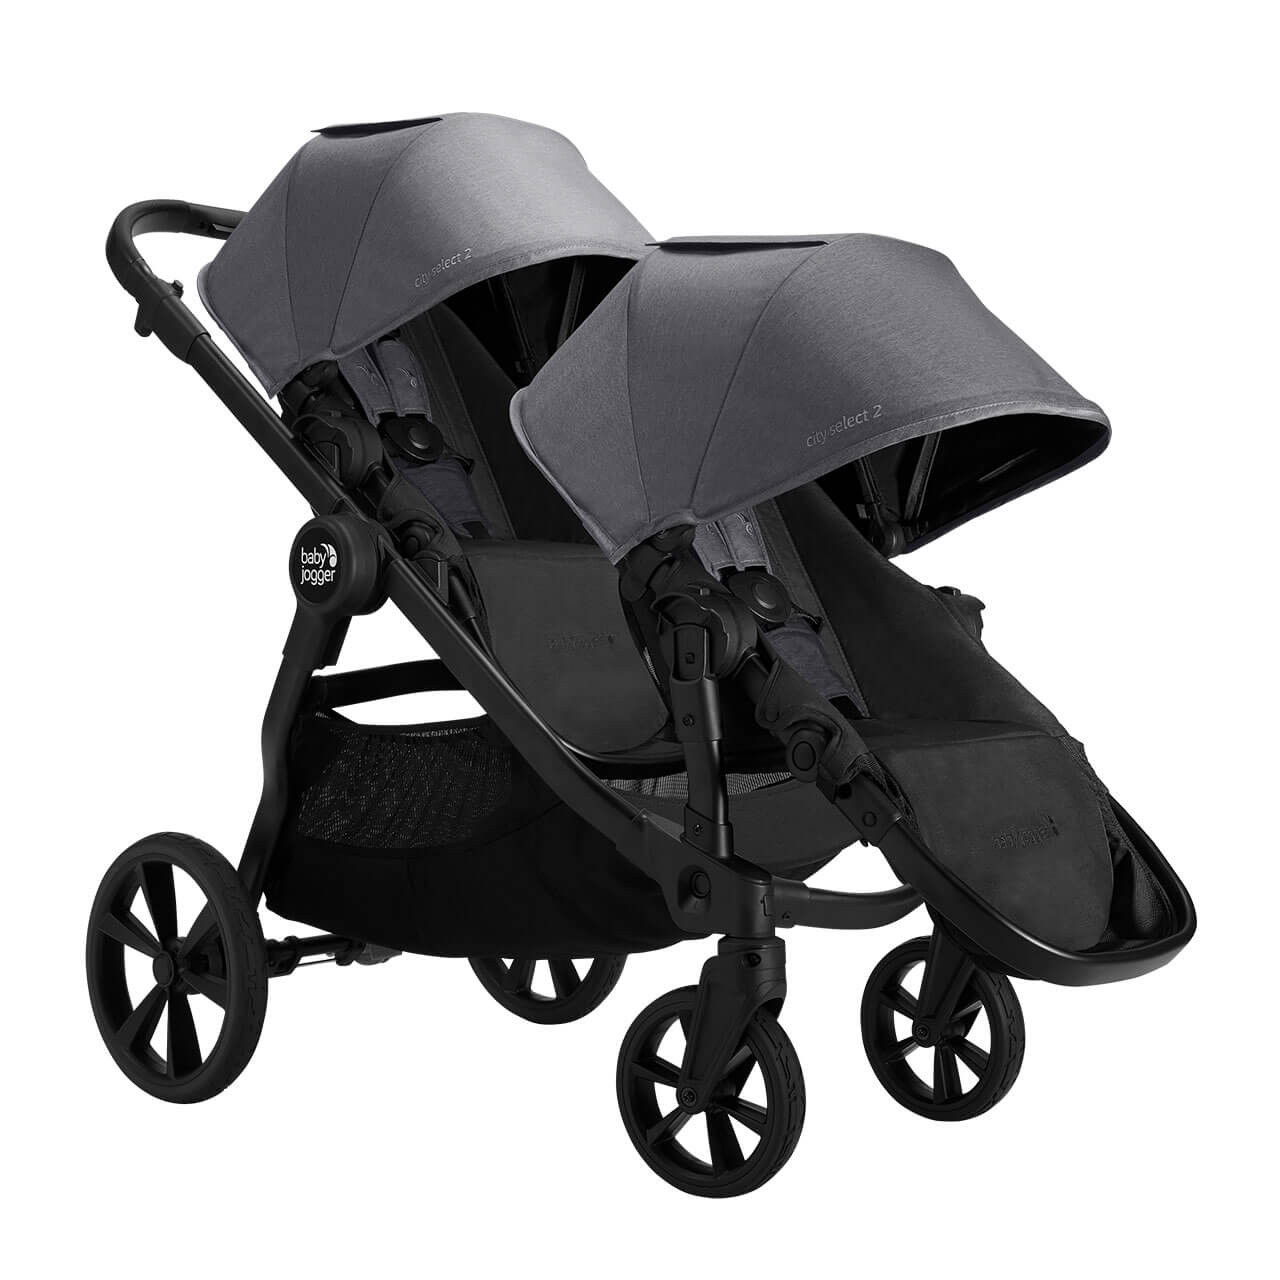 Jogger Select 2 Double Stroller + Carrycot - Slate